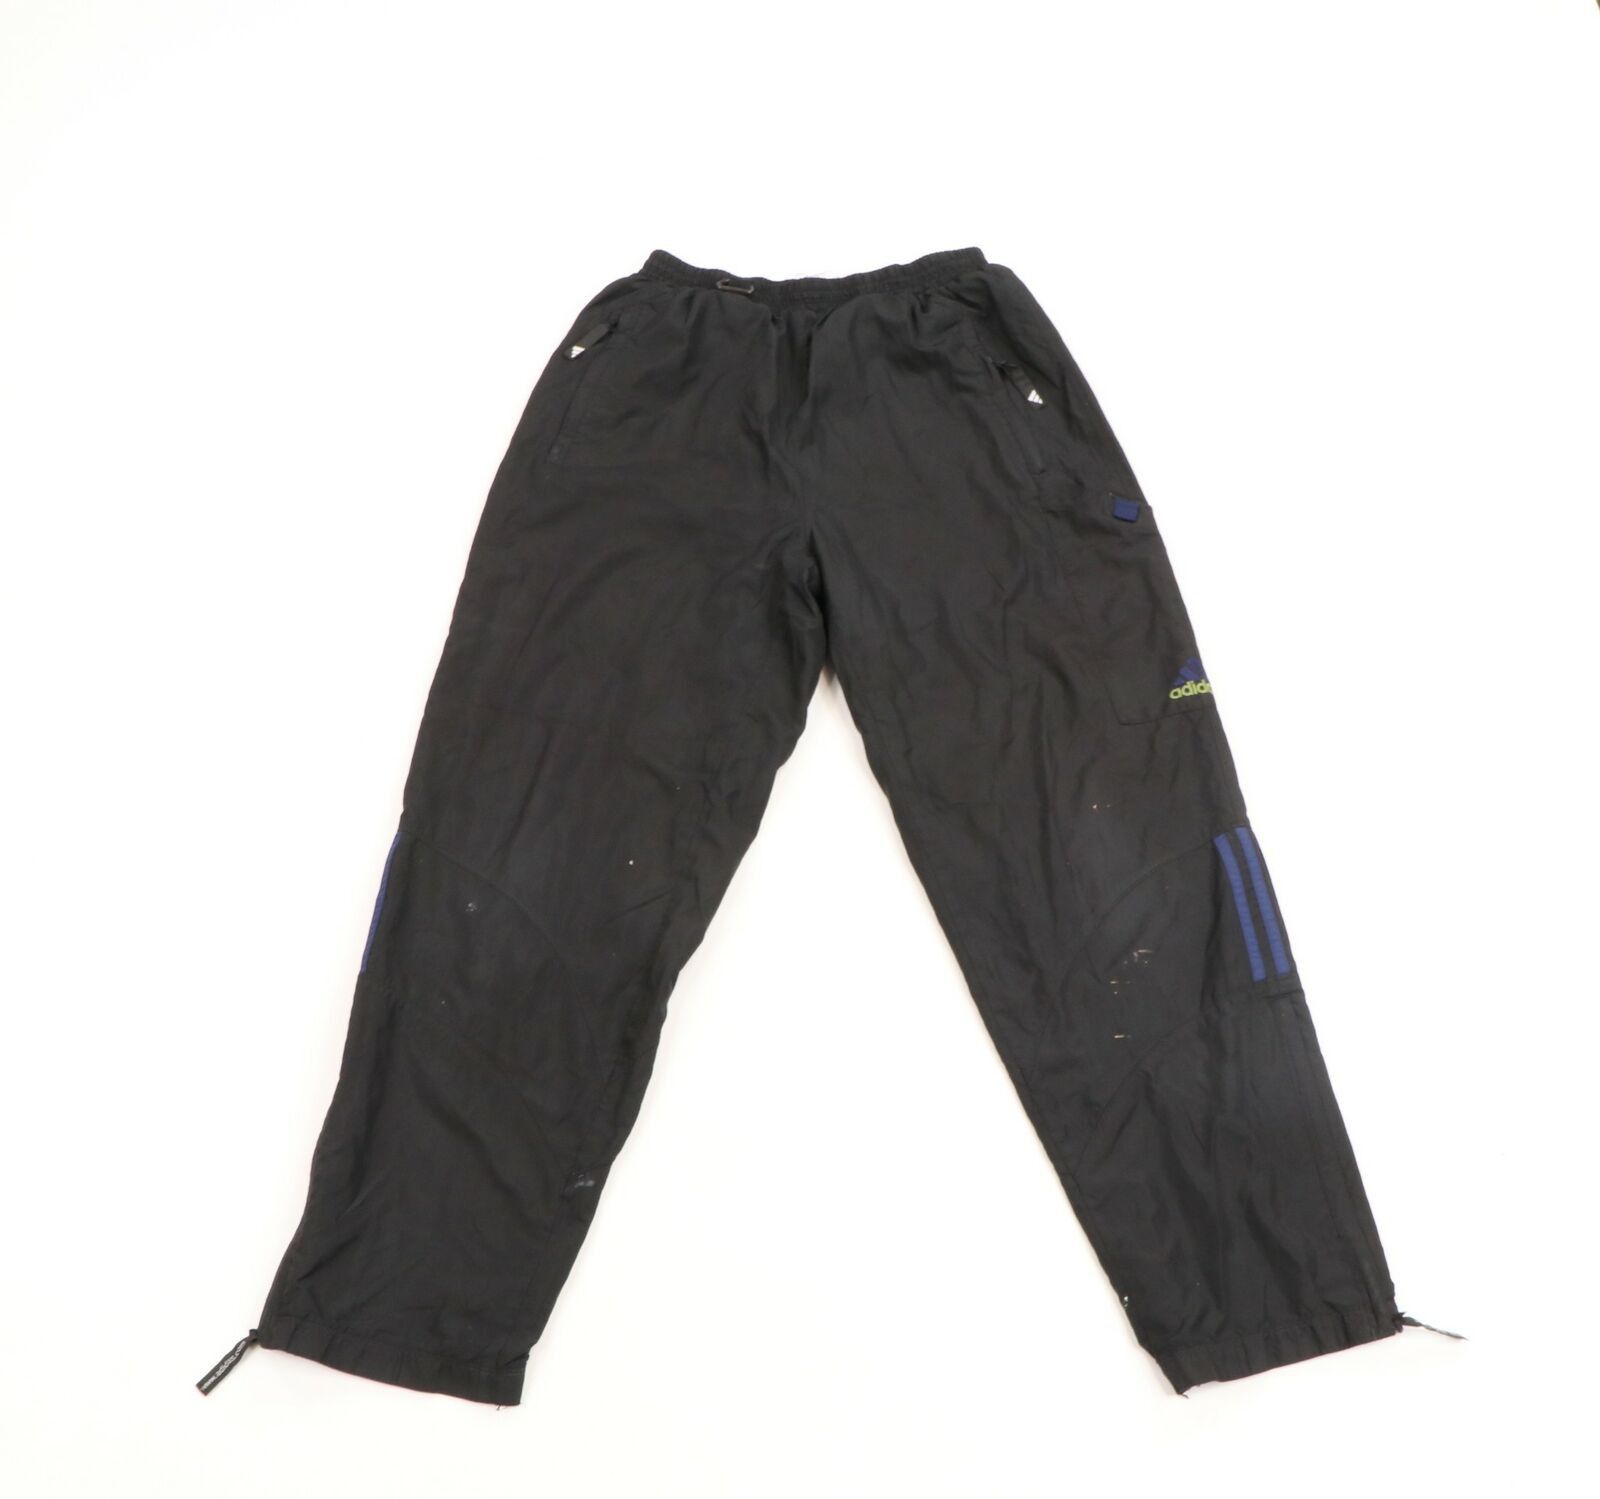 Adidas Vintage 90s Adidas Lined Spell Out Striped Zip Cuff Pants Size US 32 / EU 48 - 1 Preview